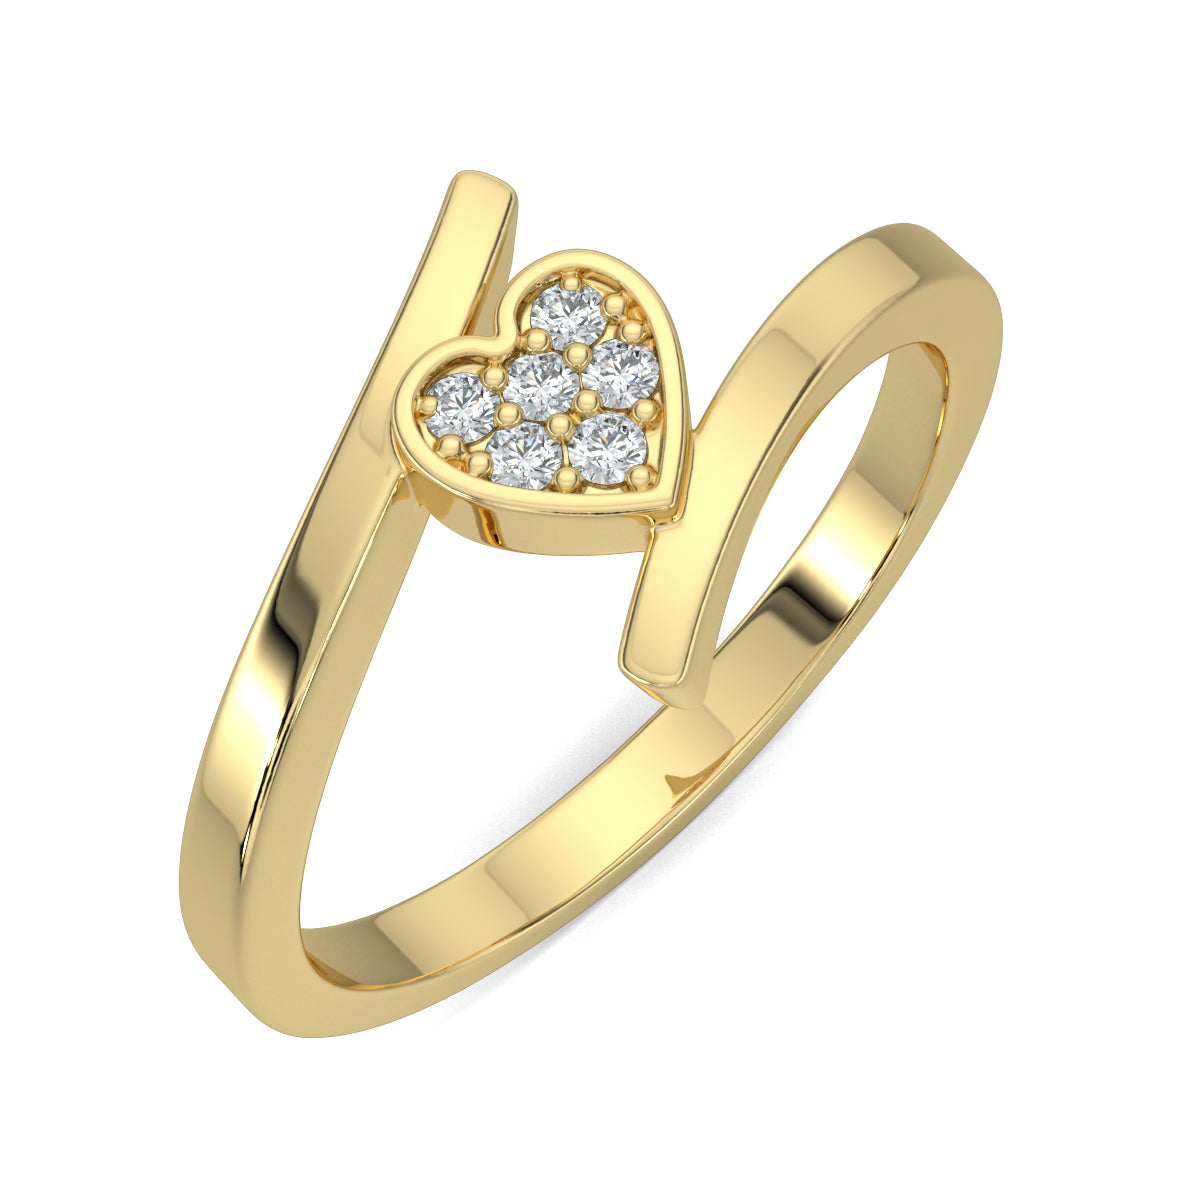 Yellow Gold, Diamond Ring, Natural diamond ring, Lab-grown diamond ring, Everlasting Heart Sparkle Ring, Forever Yours collection, open band diamond ring, pave setting, heart-shaped diamond ring, round diamonds, elegant jewelry